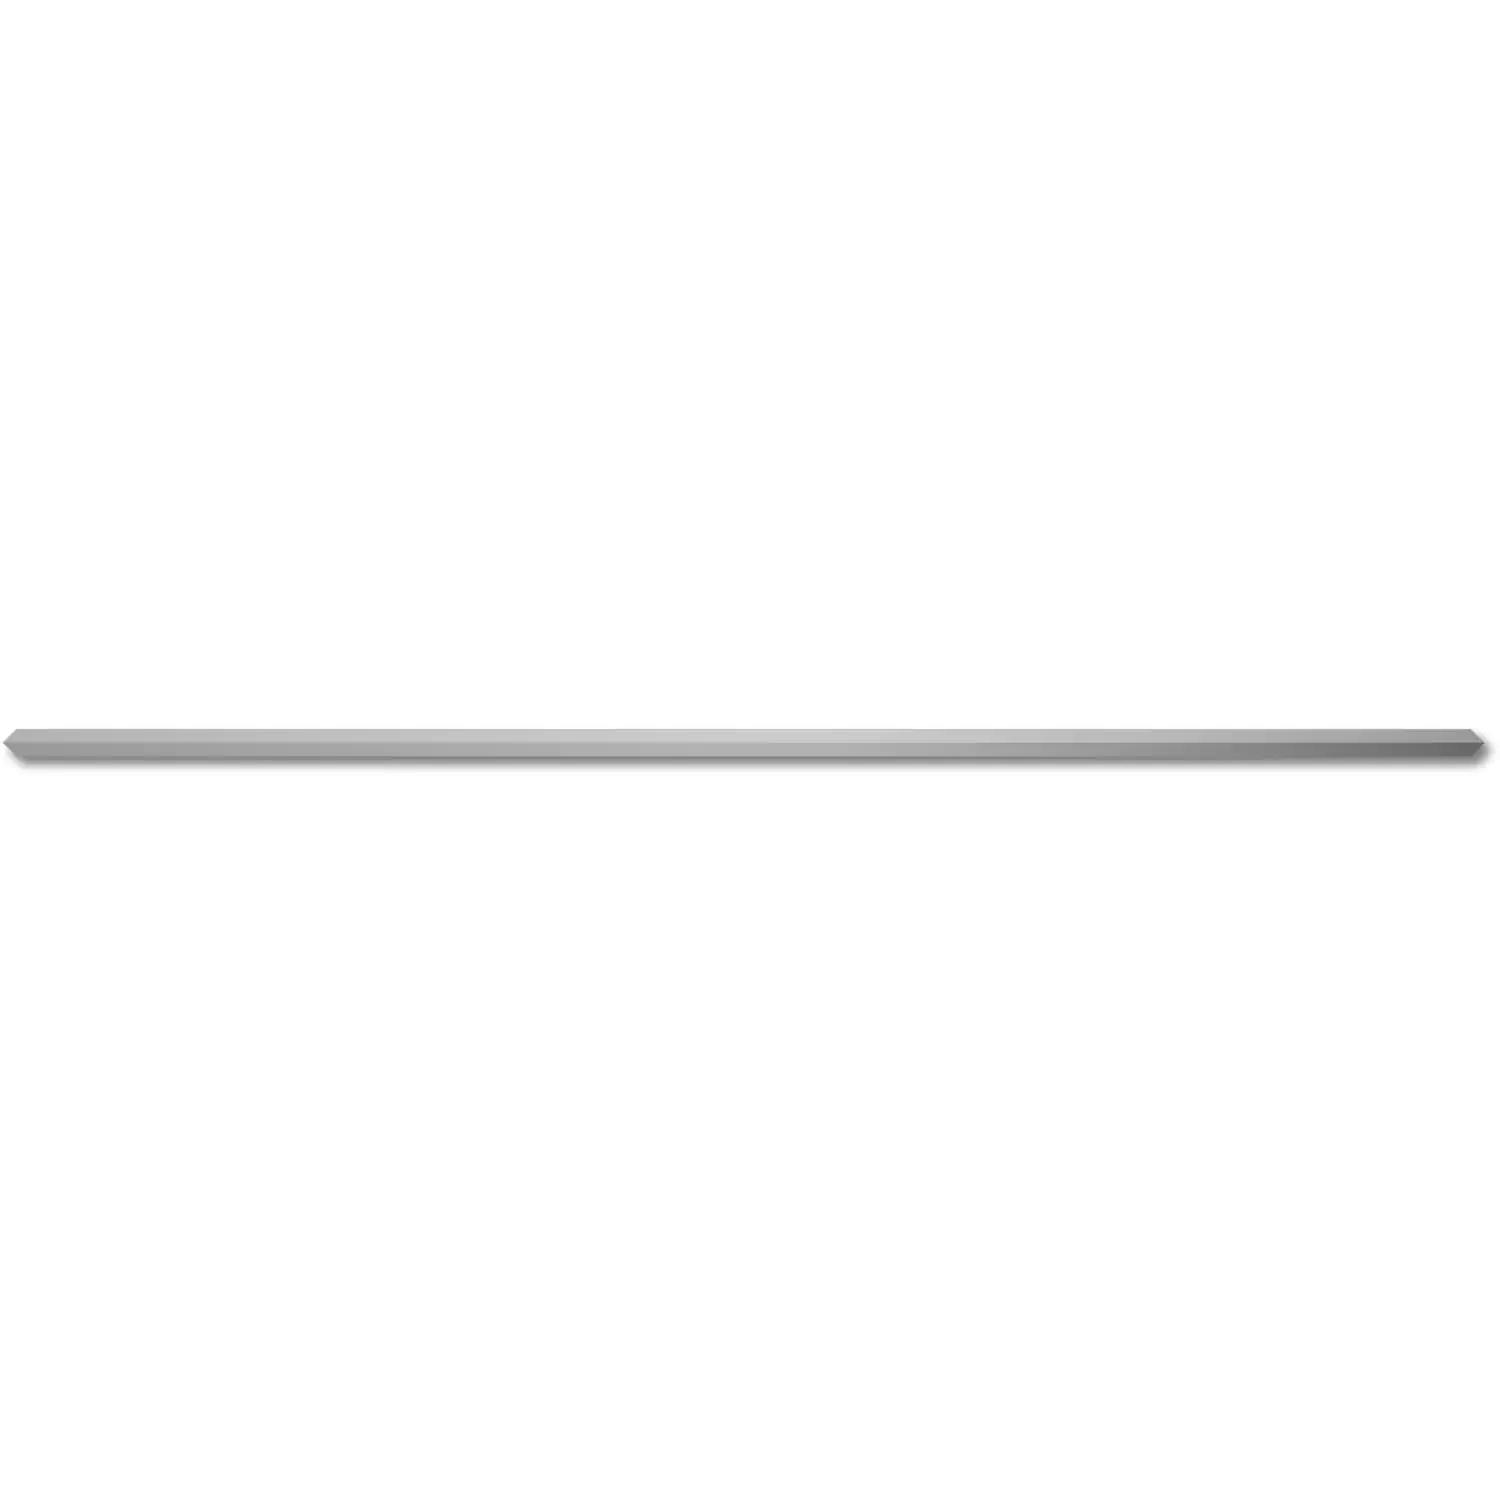 Saber Stainless Rotisserie Spit Rod · 330 Size